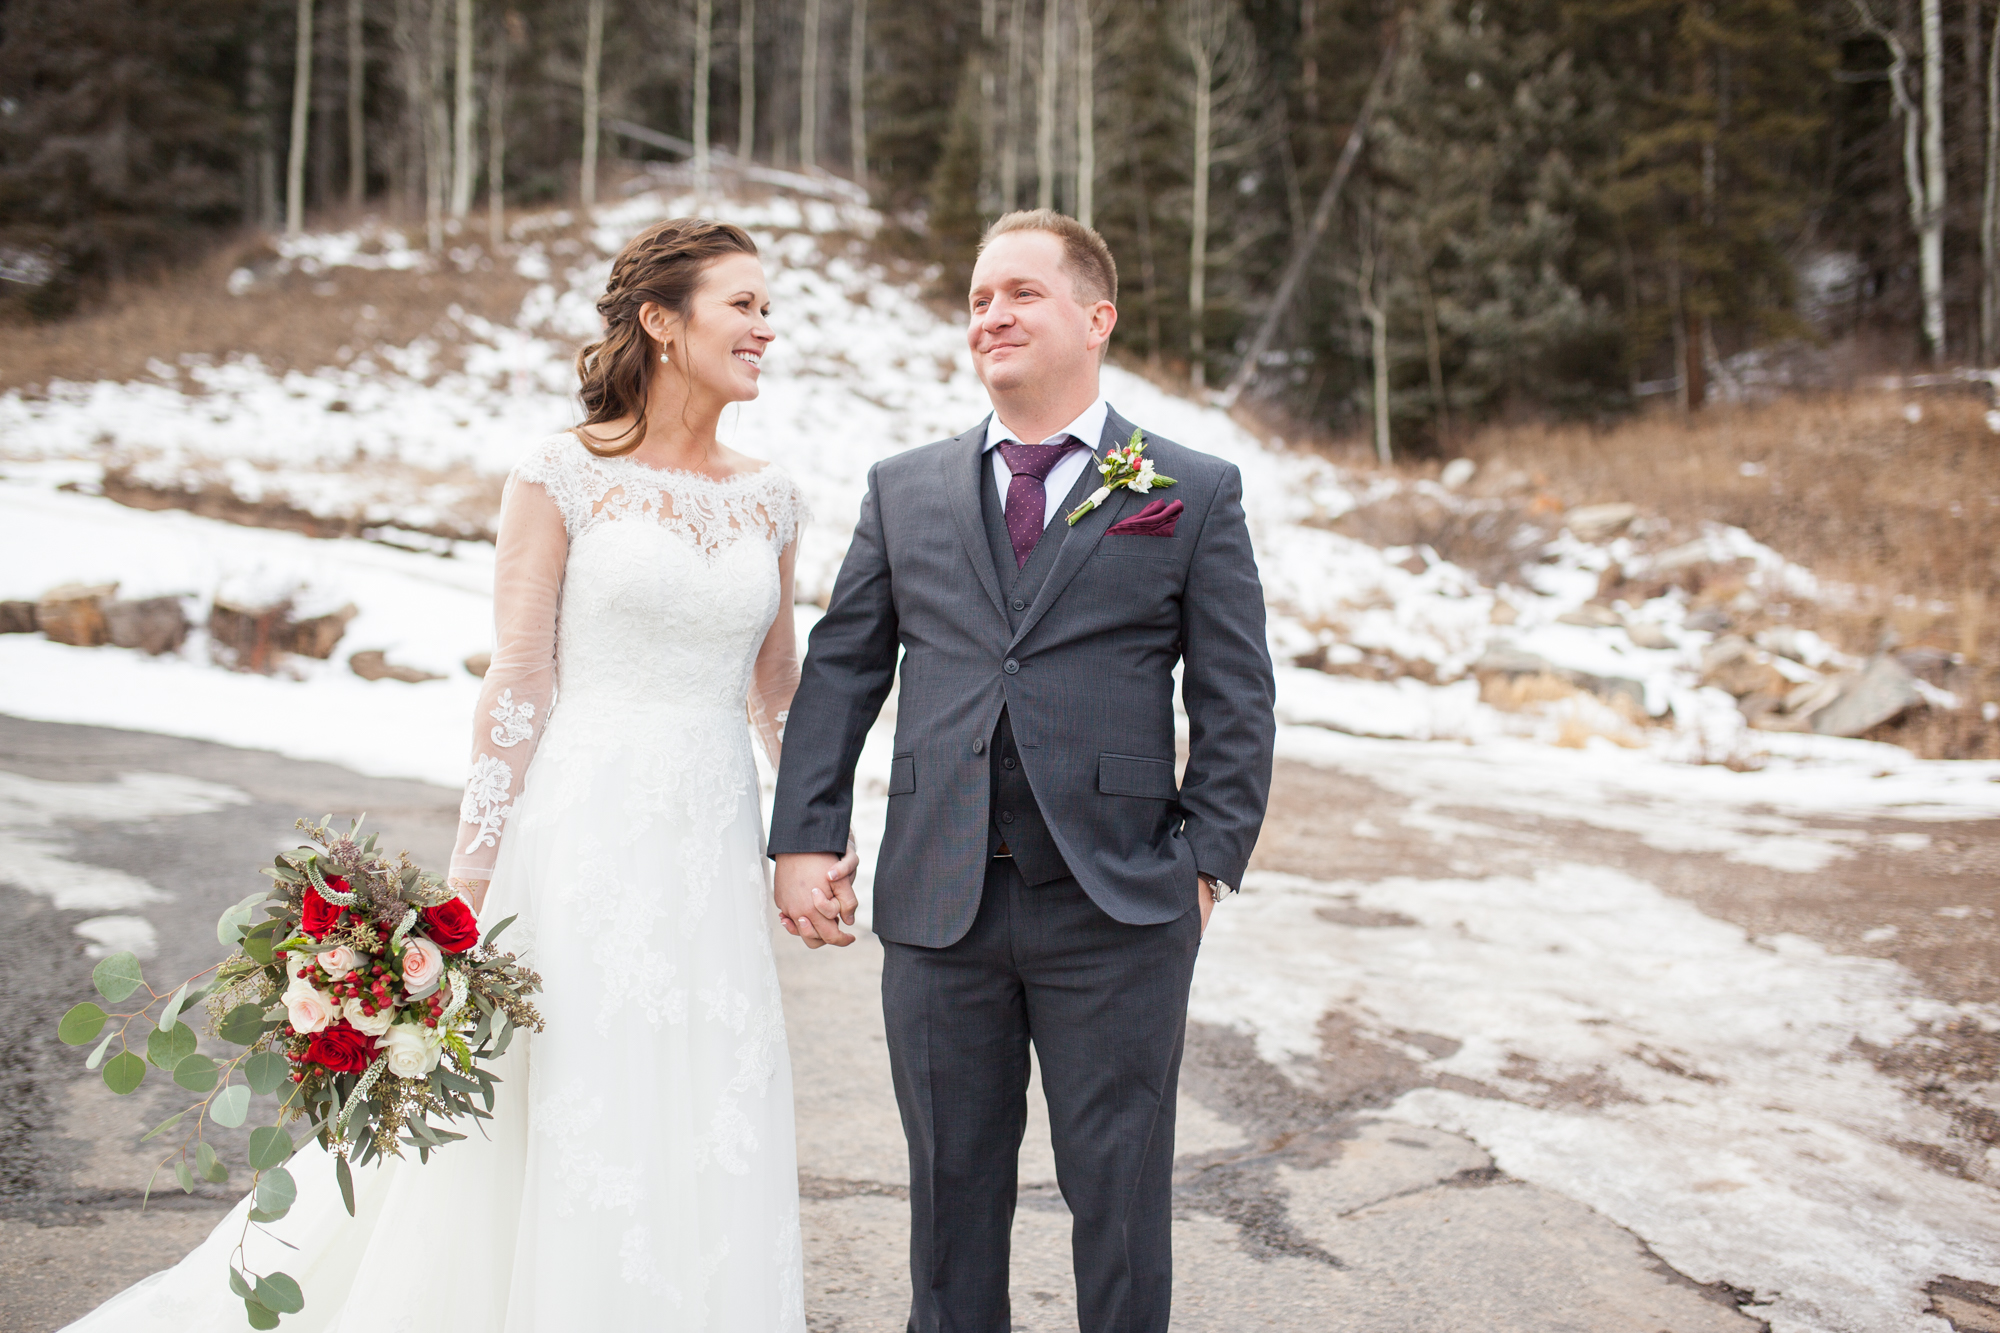 Durango, Colorado Winter Wedding ideas bride and groom in the snow with red rose bouquet and boutonniere